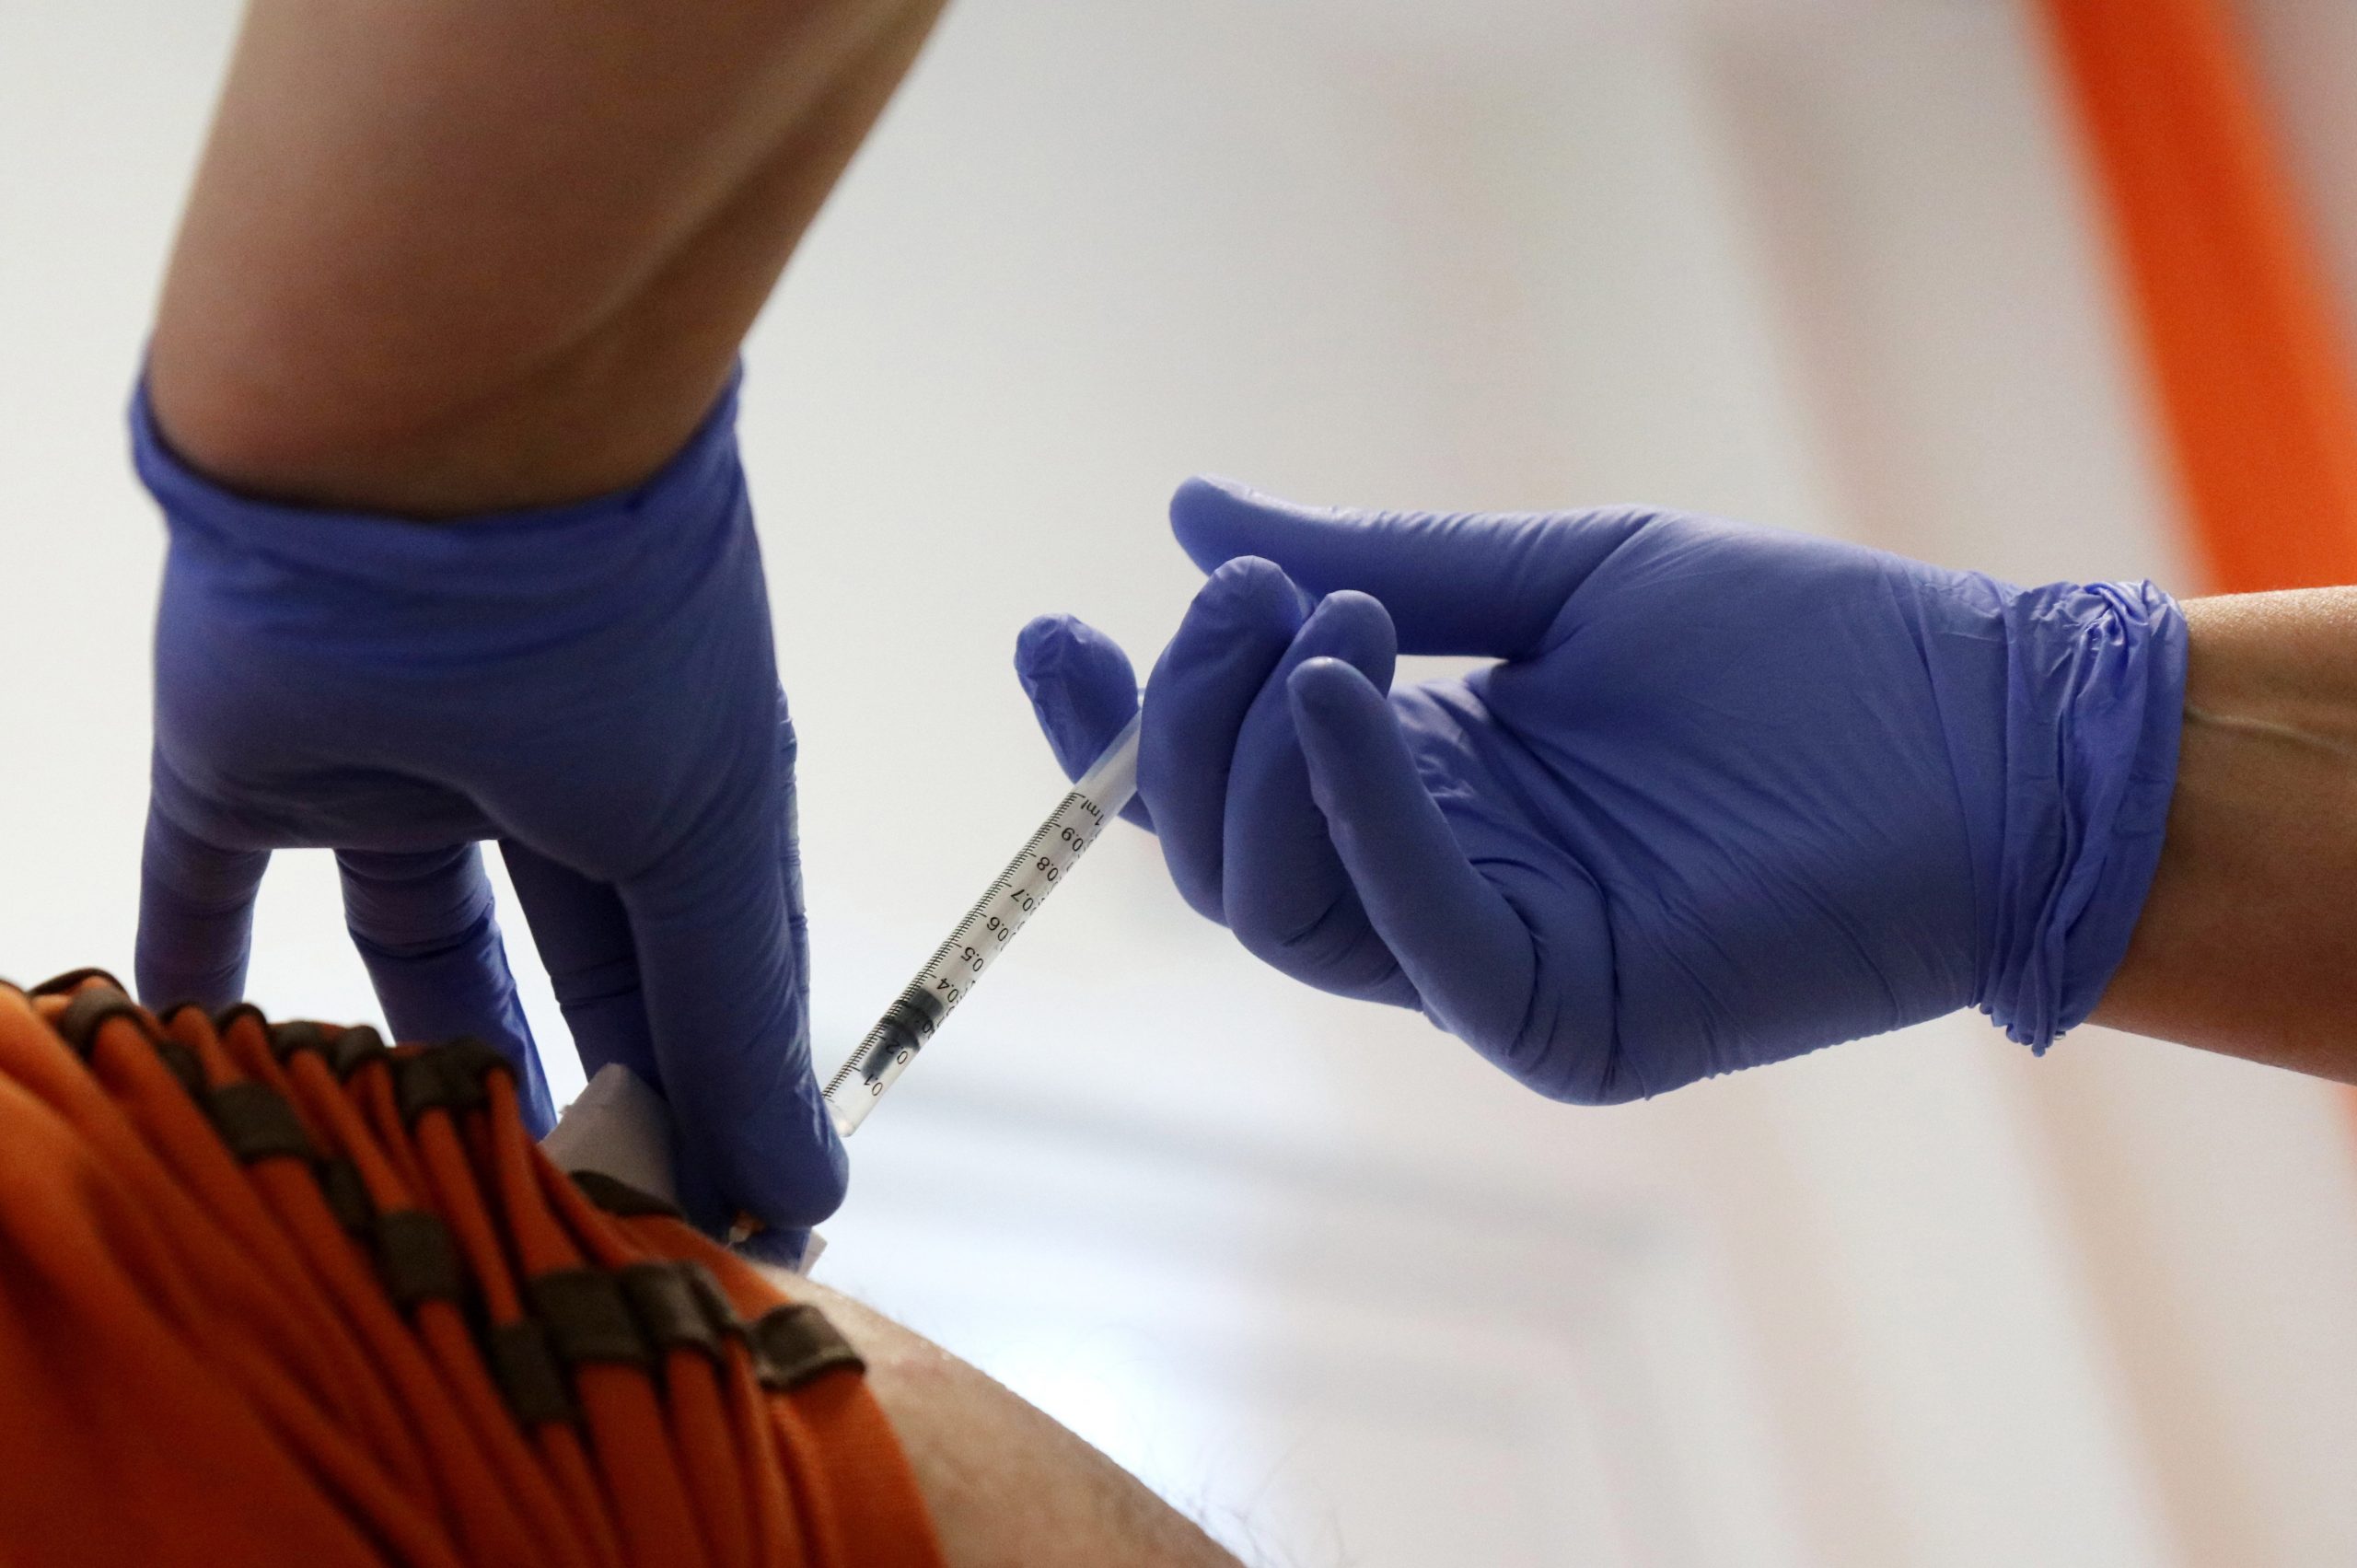 Gov't Gives Employers Right to Make Vaccination Compulsory for Employees